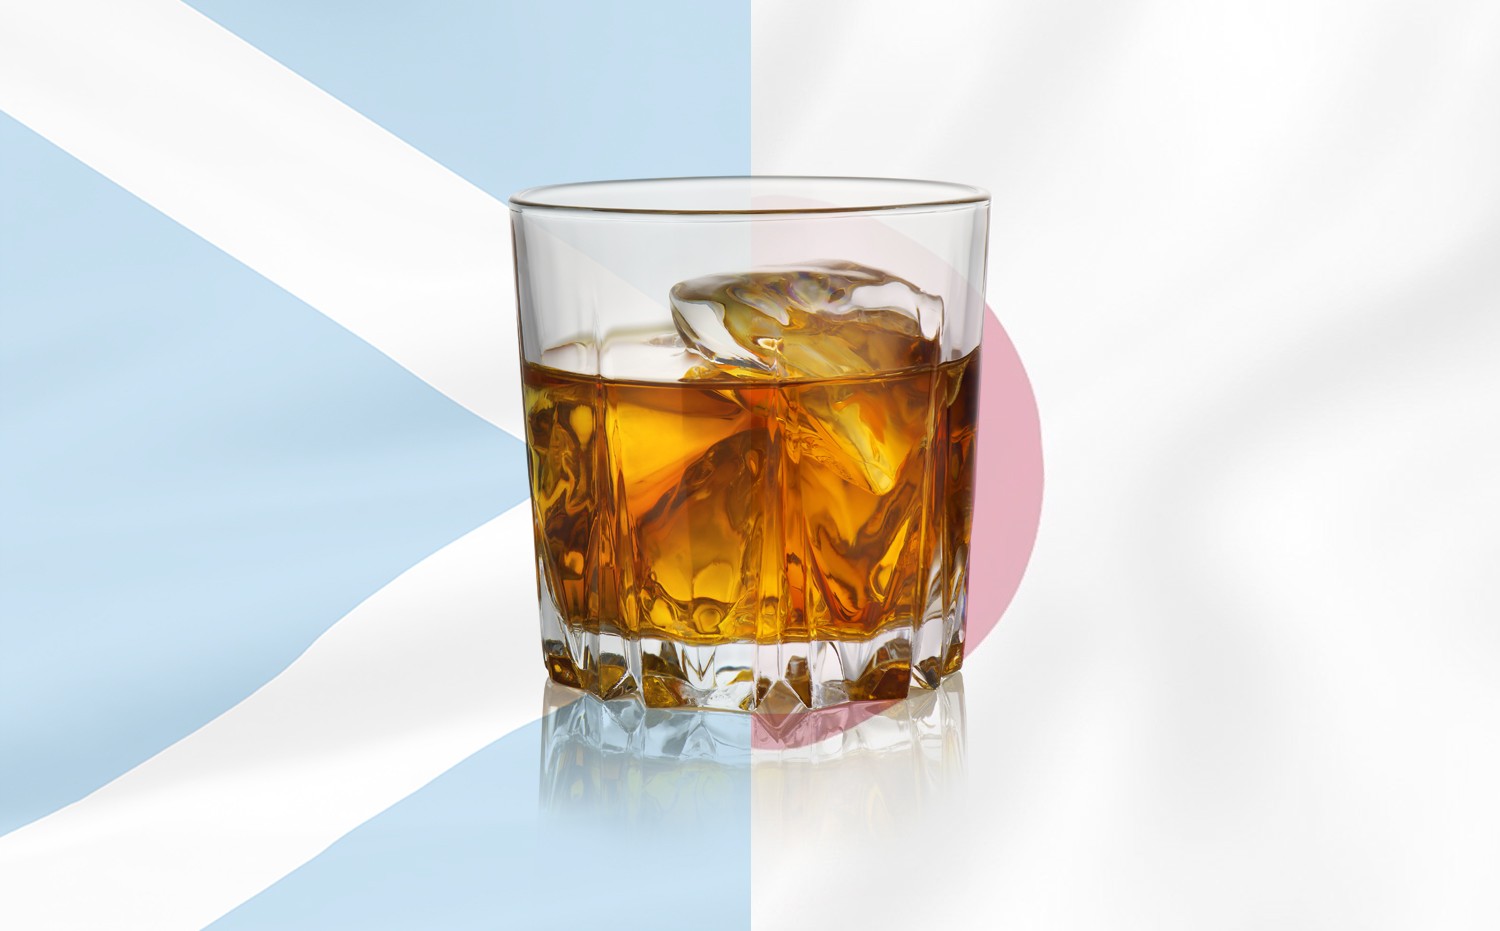 Should you invest in Scotch or Japanese whisky? Photo: SCMP/Getty Images